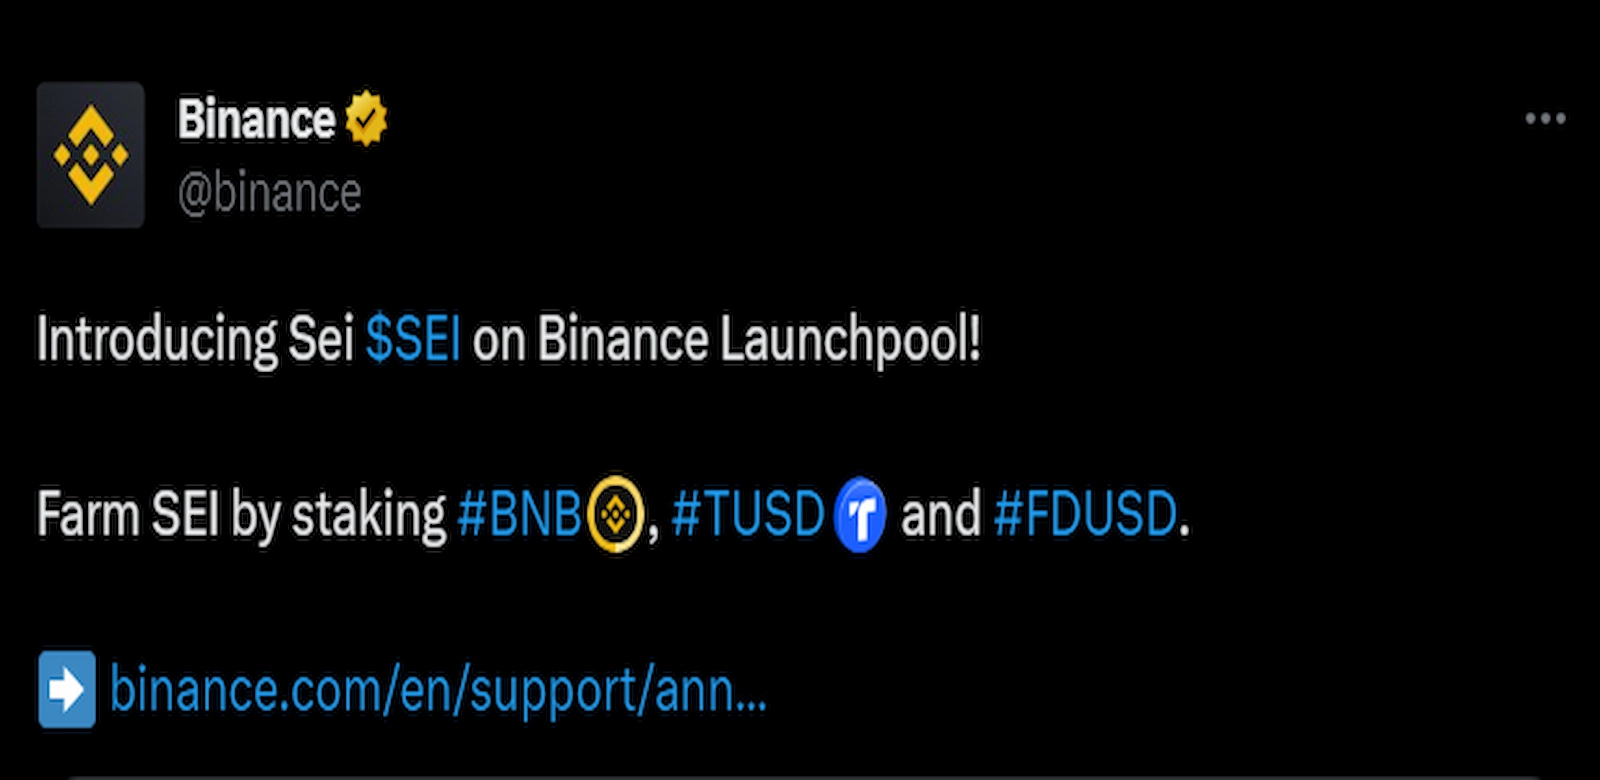 Binance announced the introduction of SEI tokens to its Binance Launchpool